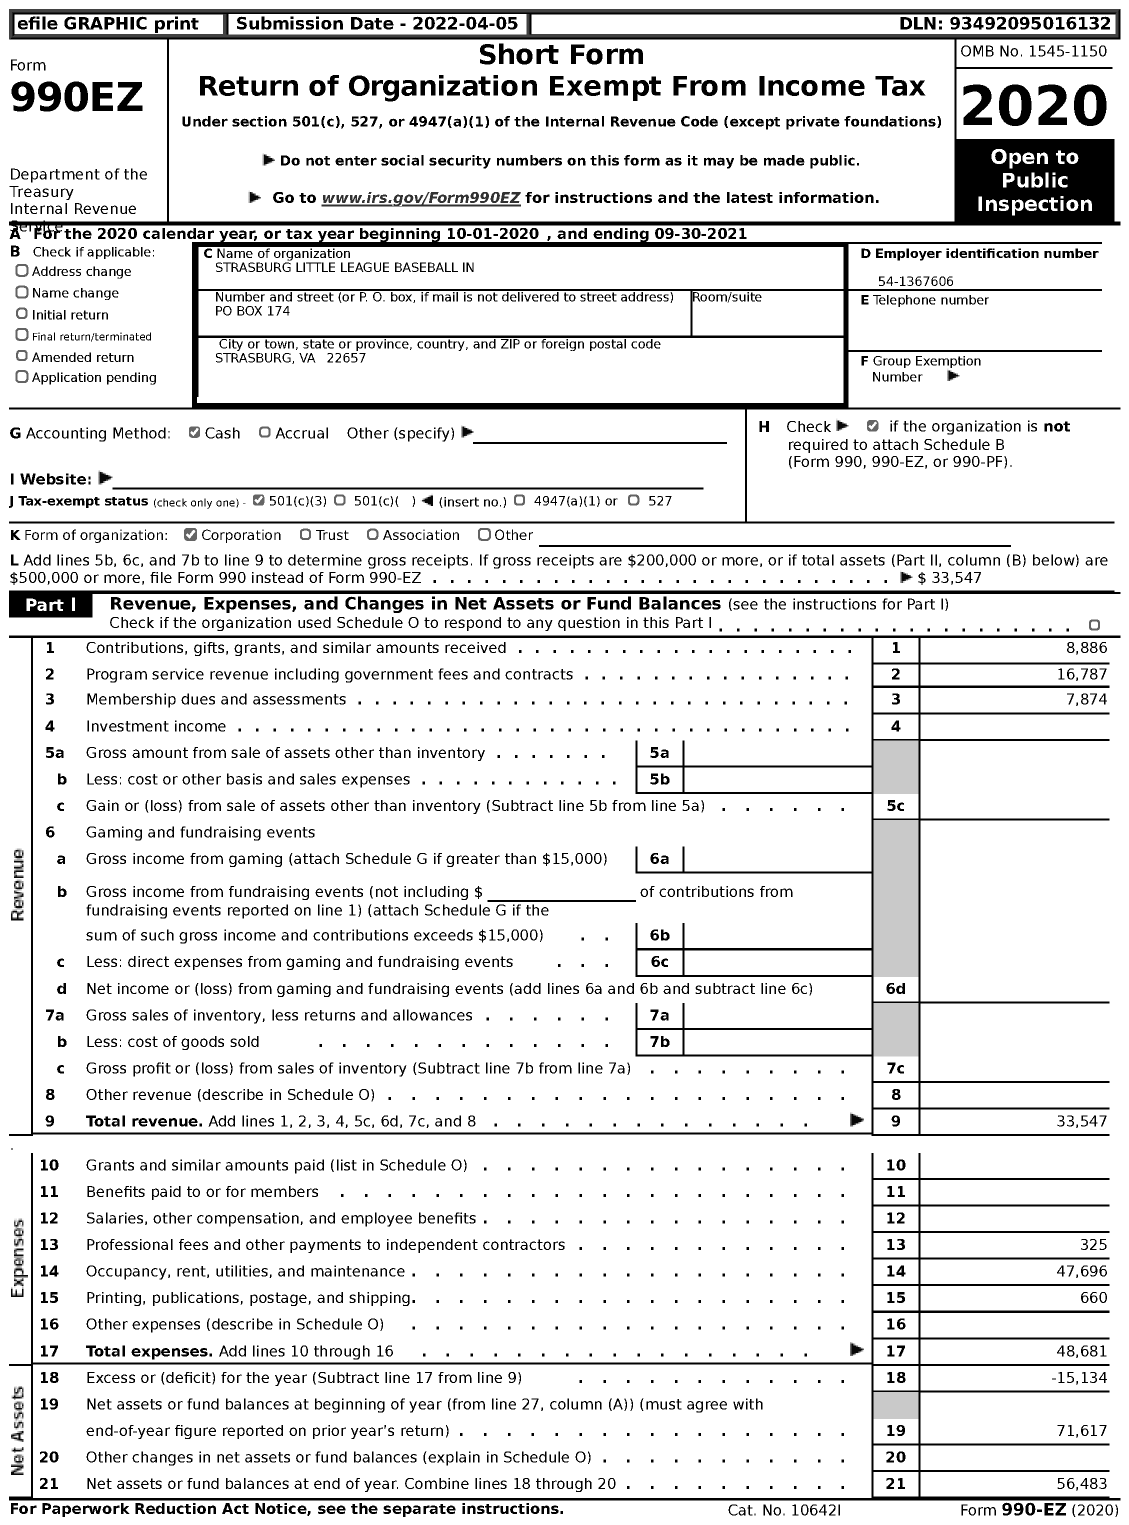 Image of first page of 2020 Form 990EZ for Little League Baseball - 3460307 Strasburg LL